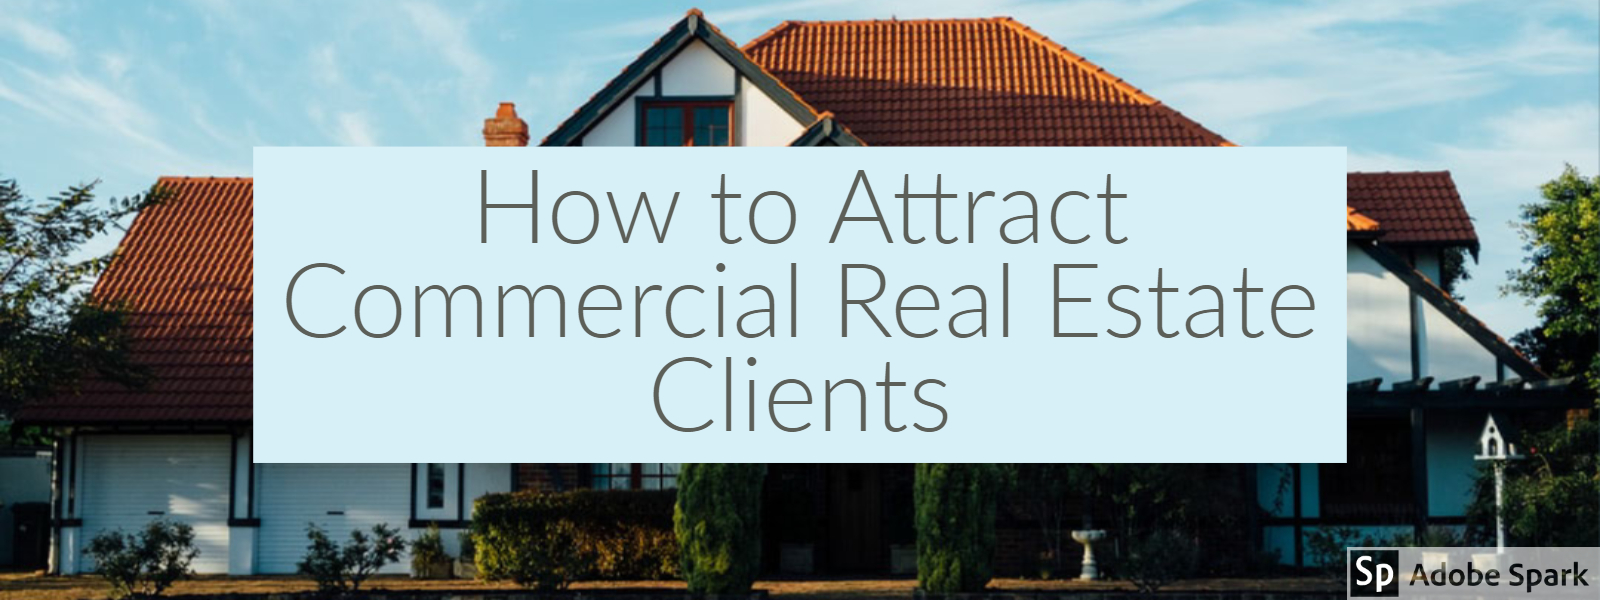 How to Attract Commercial Real Estate Clients